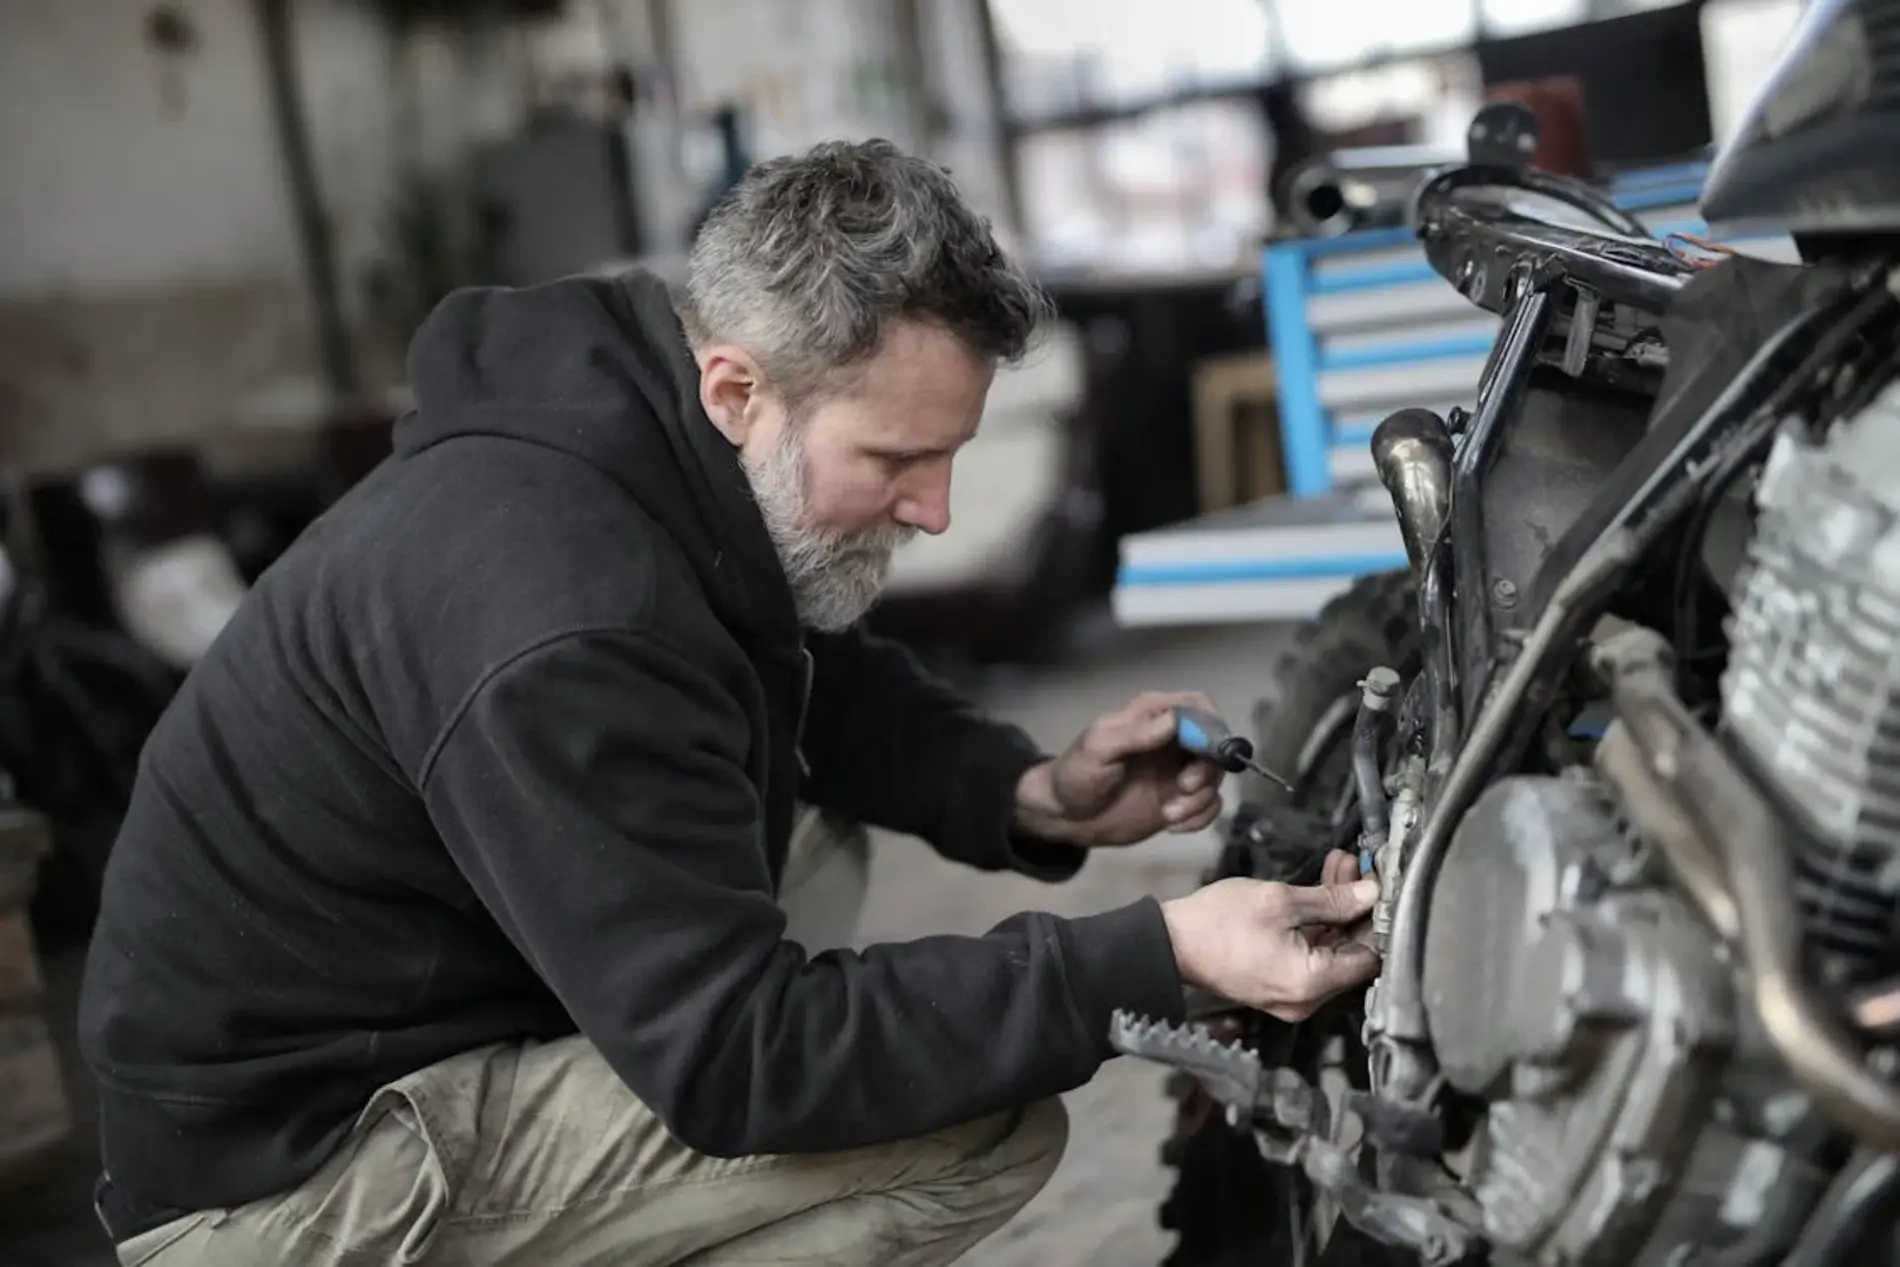 Bearded man fixing motorcycle in the workshop